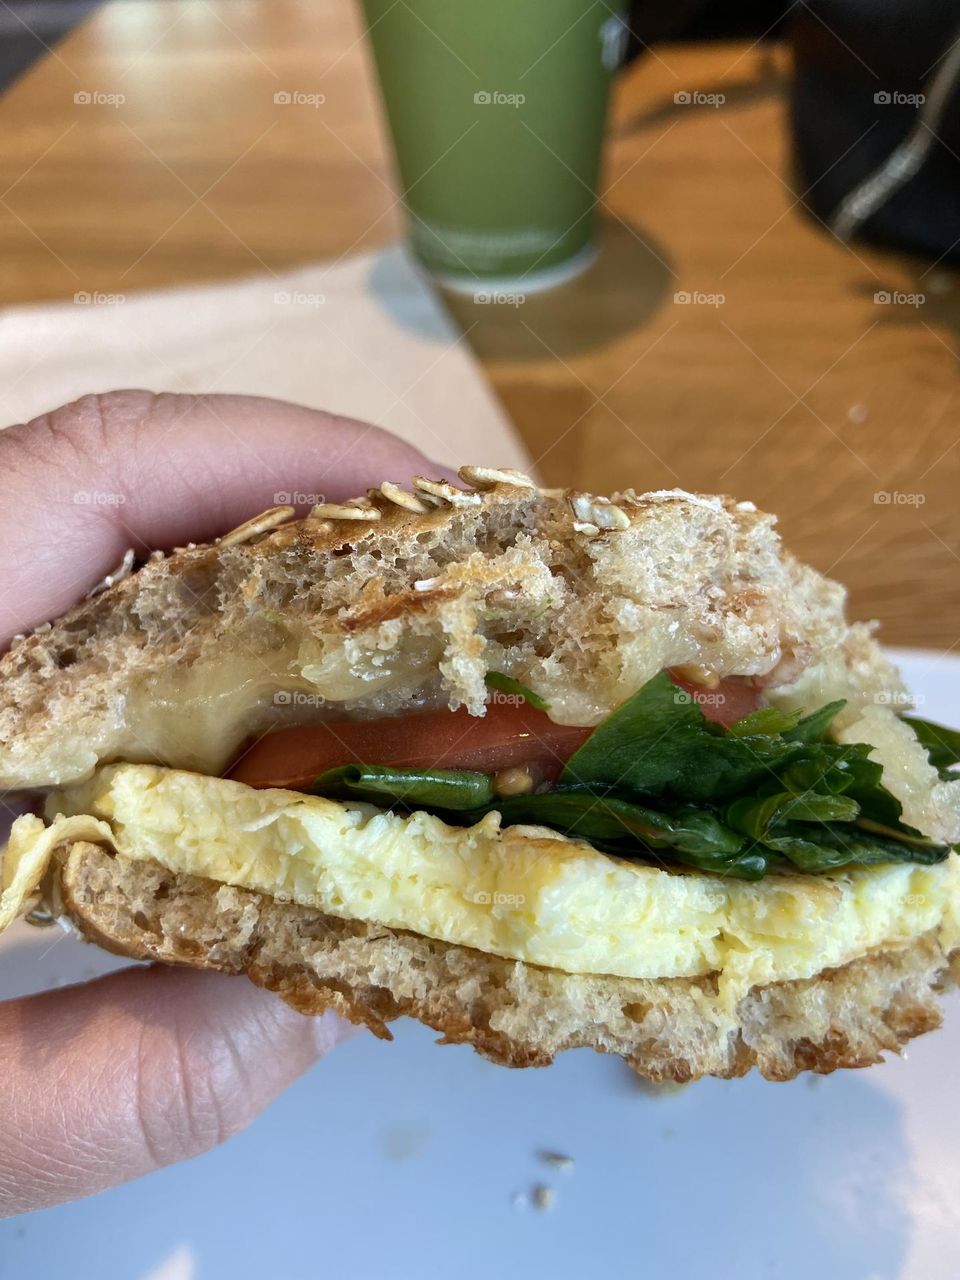 A breakfast sandwich with scrambled egg, white cheddar cheese, spinach and tomato from Panera Bread. This is a sandwich I customized, but they many options on the menu for a healthy start in the morning. I also had a cup of orange ginger mint tea. 